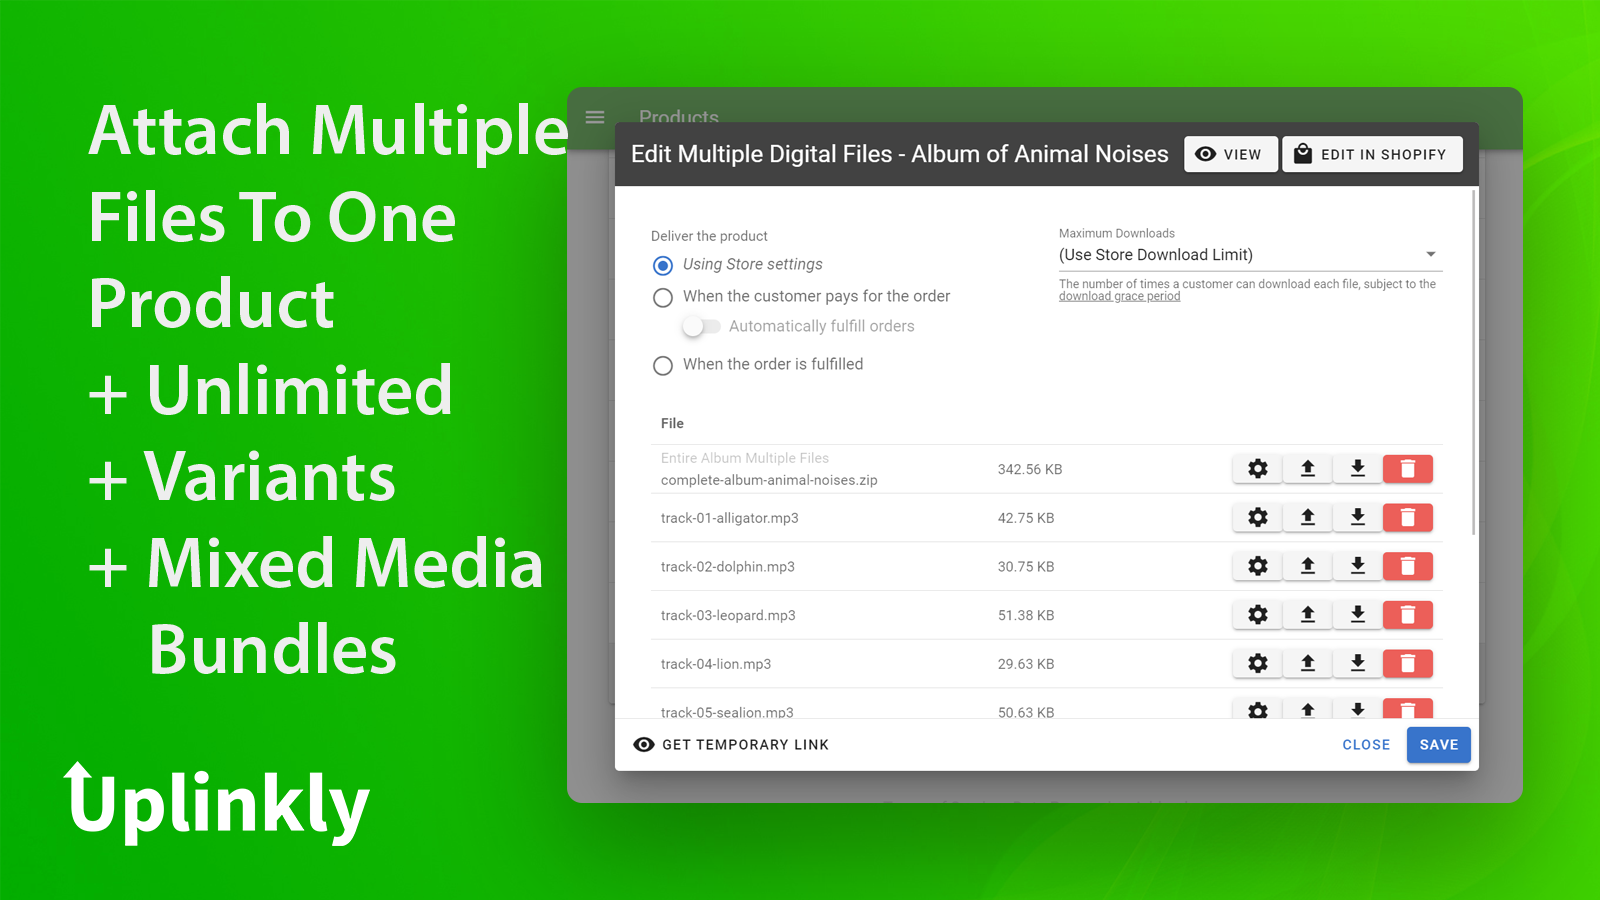 Add multiple files, physical & digital variants and mixed media